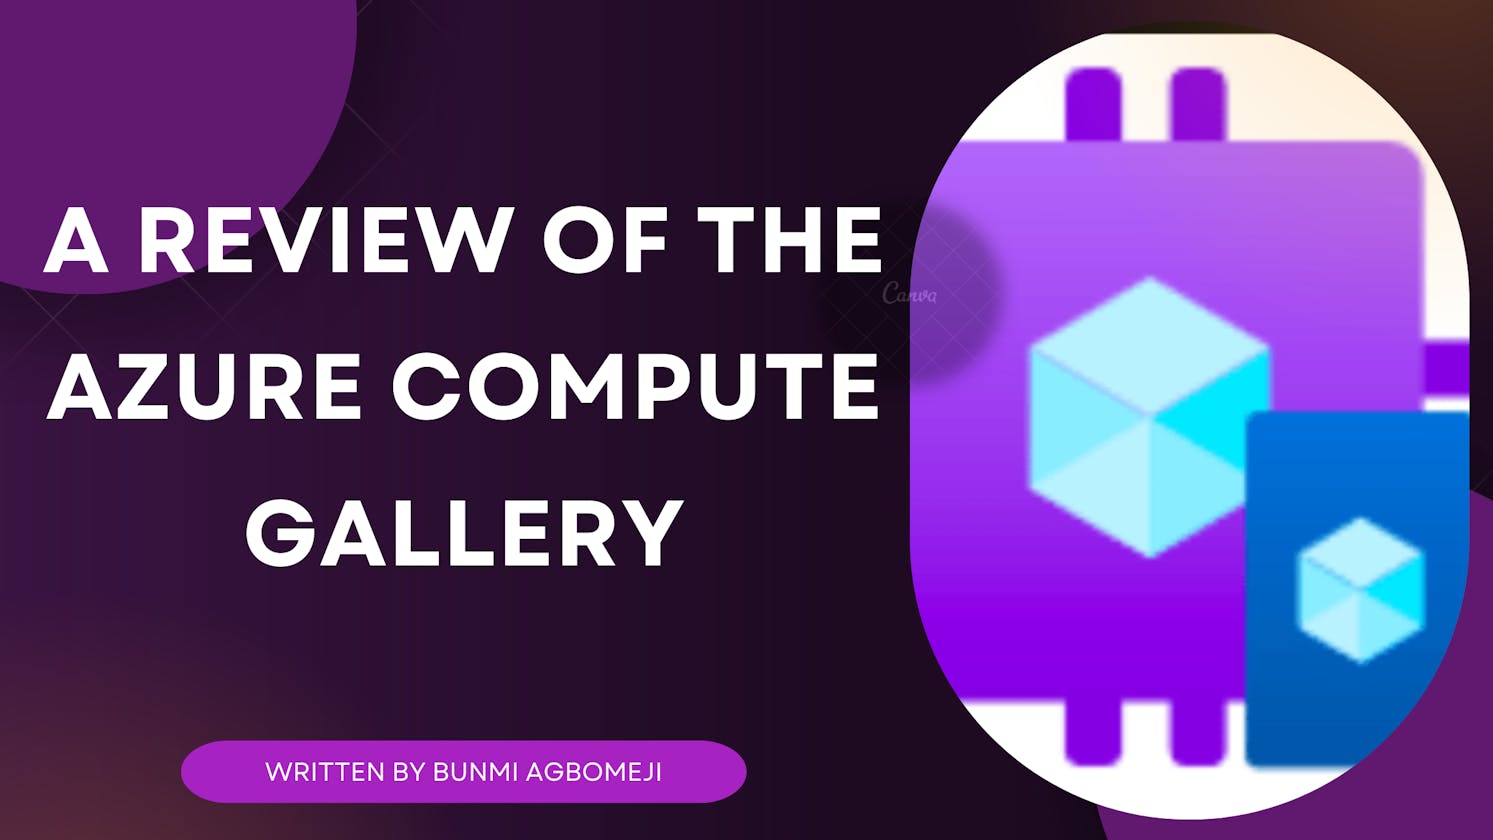 A Review of the Azure Compute Gallery